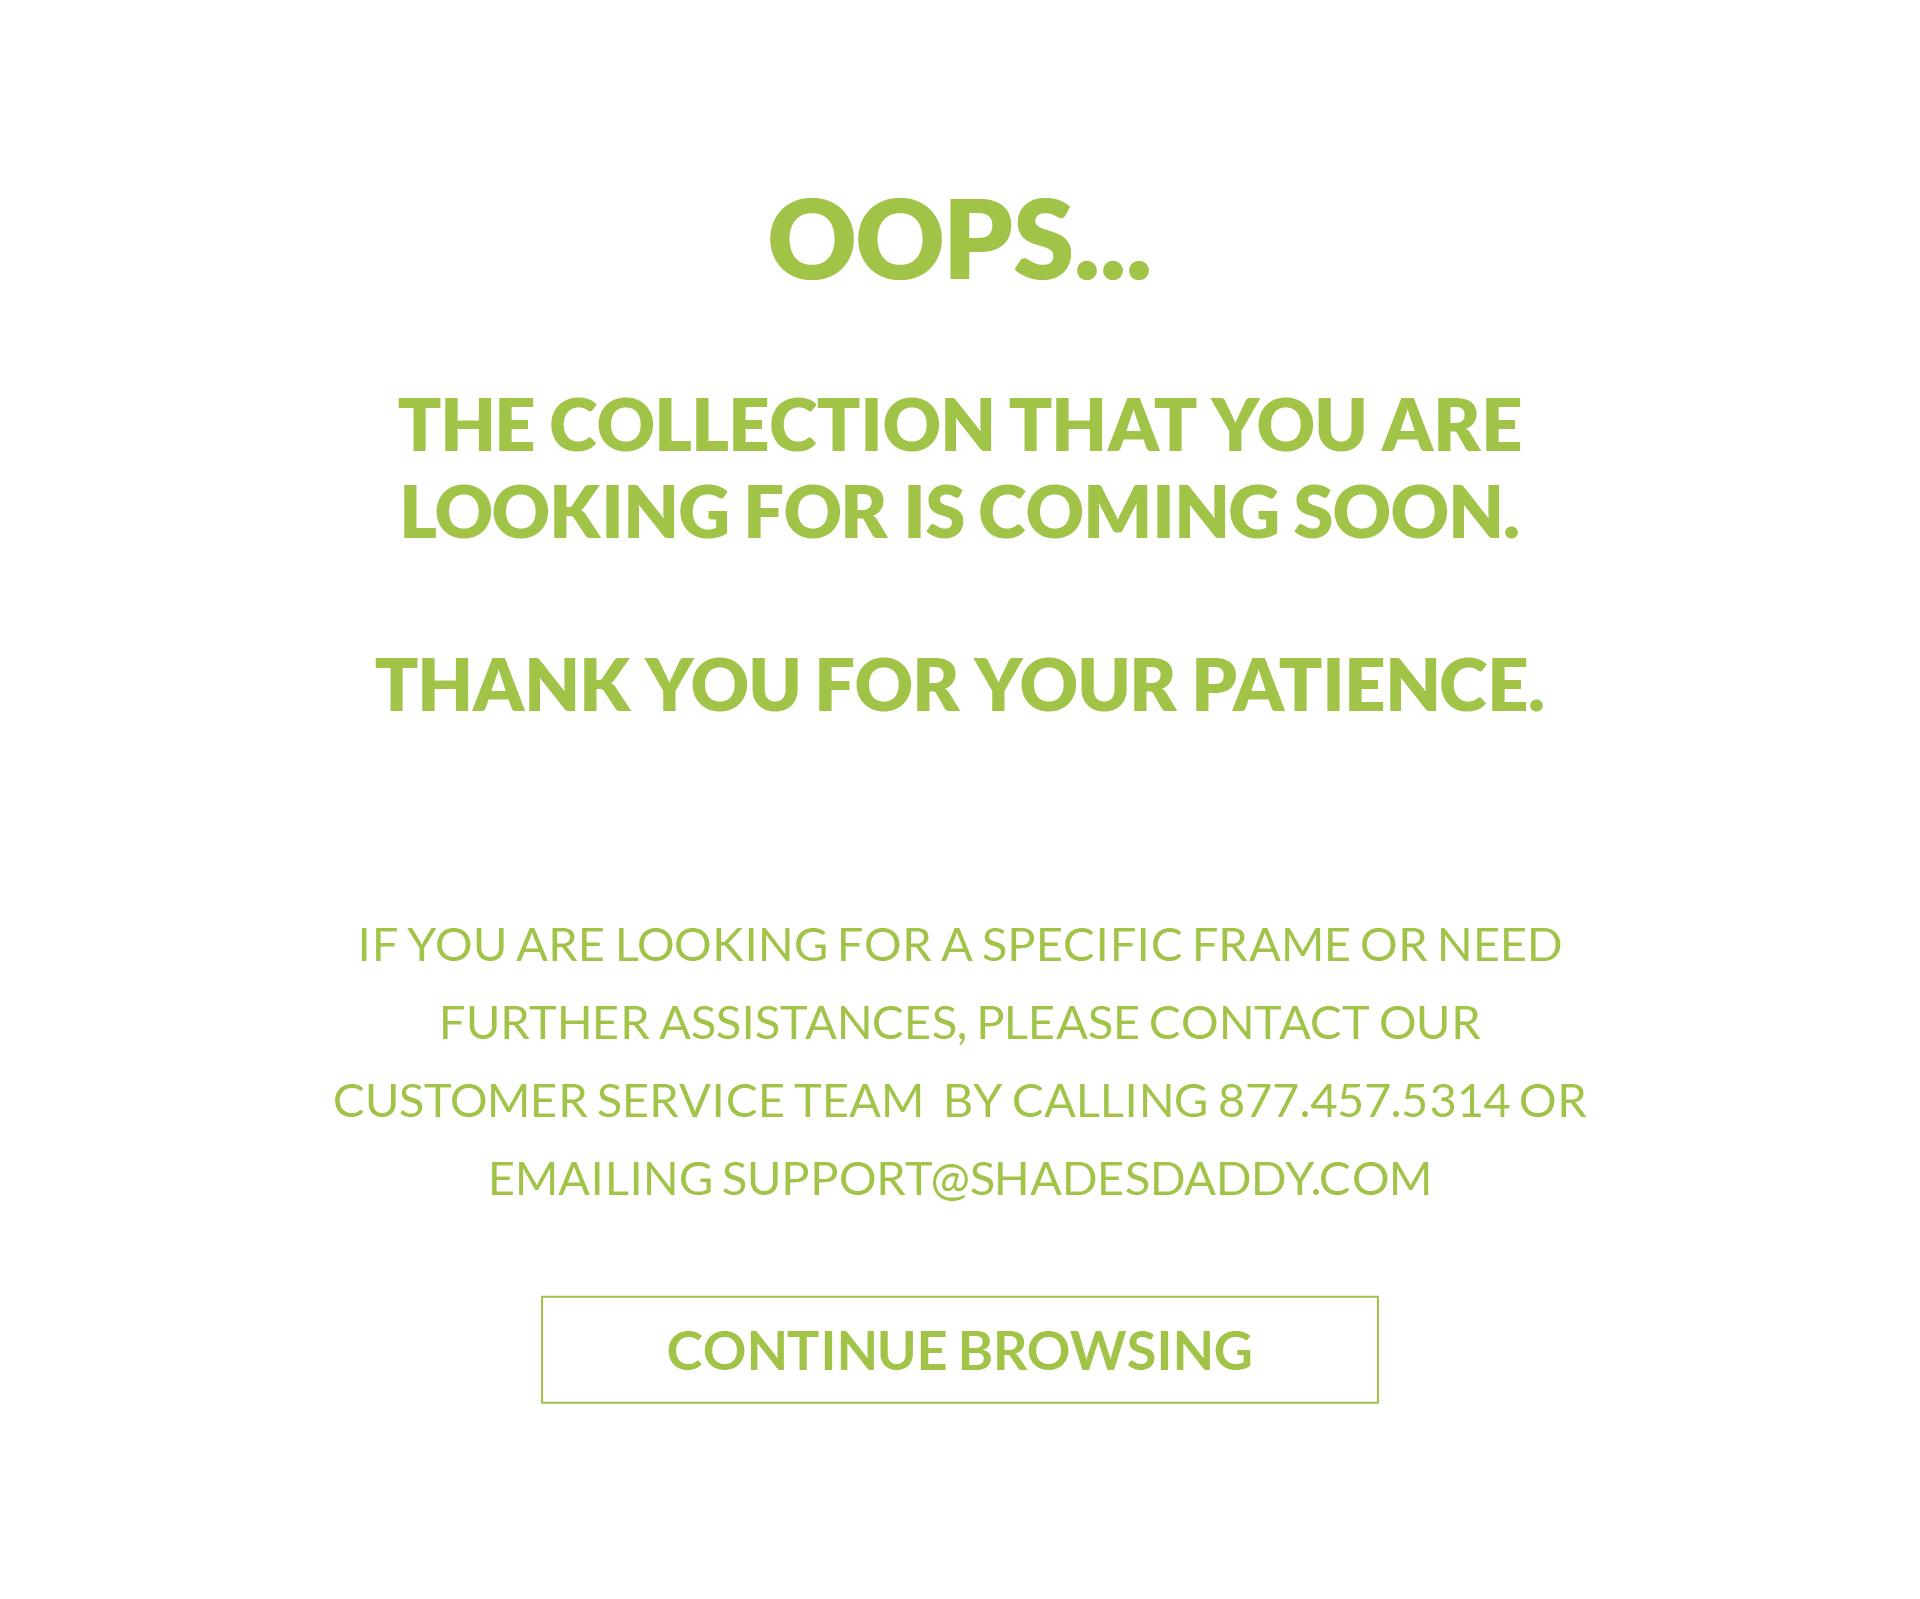 OOPS... THE COLLECTION PAGE THAT YOU ARE LOOKING FOR IS COMING SOON. THANK YOU FOR YOUR PATIENCE.